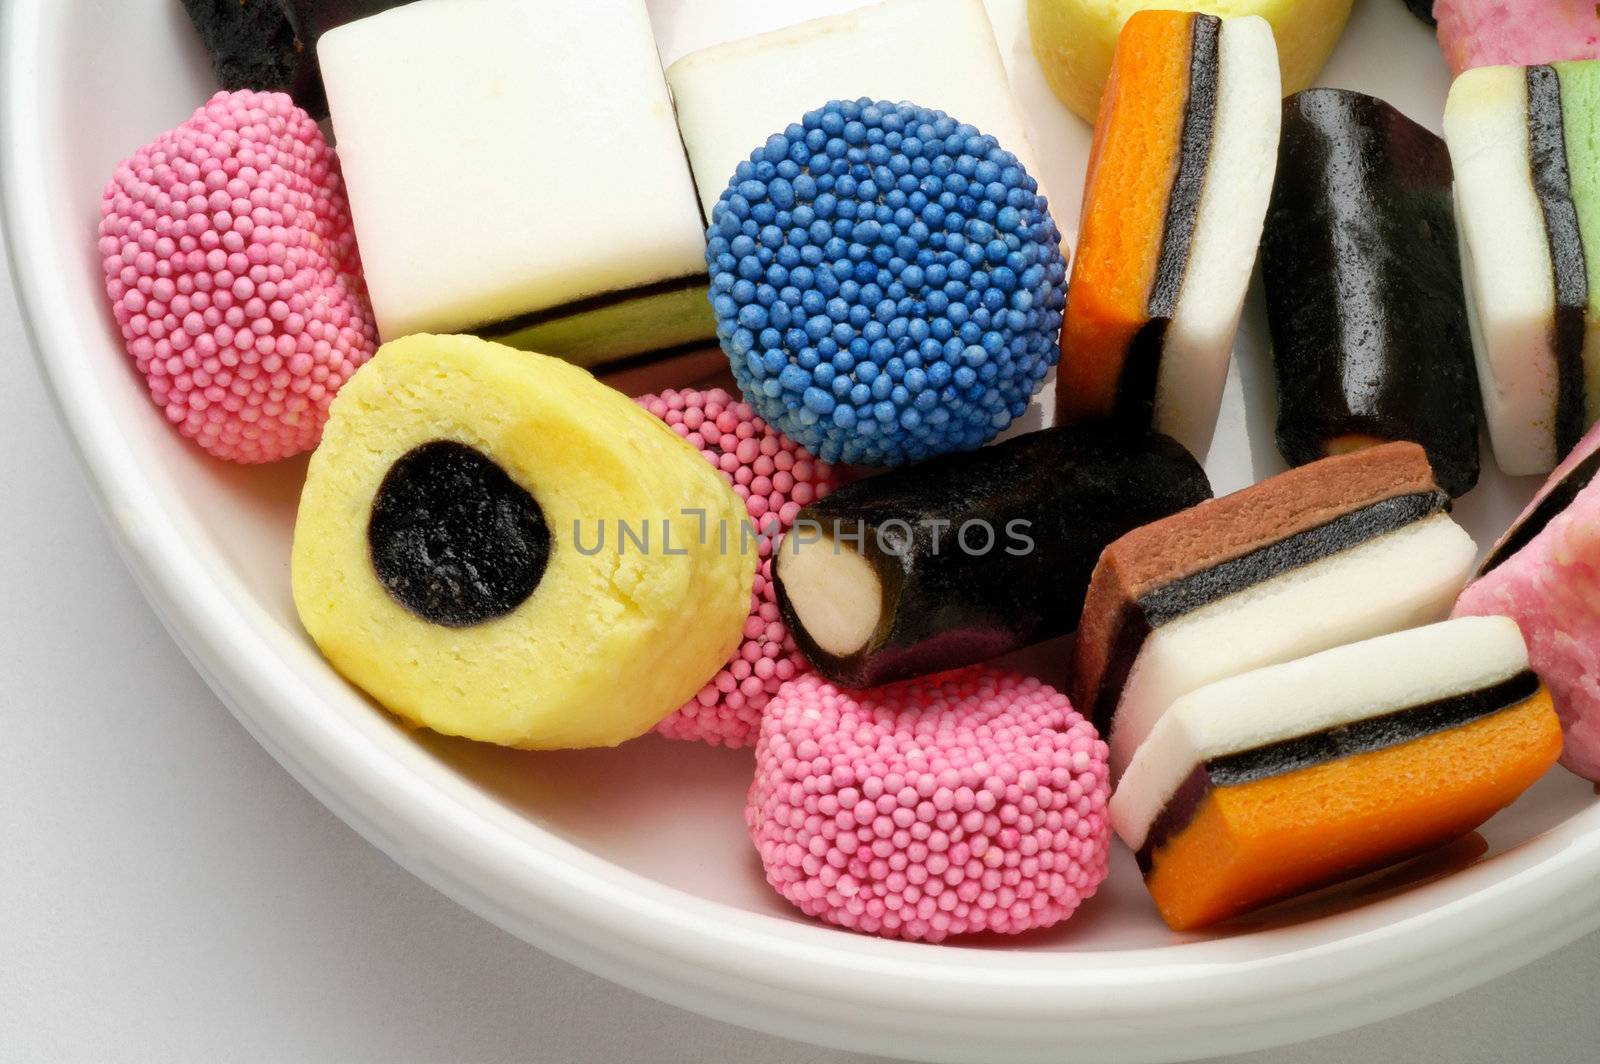 Licorice candies in bowl by Laborer